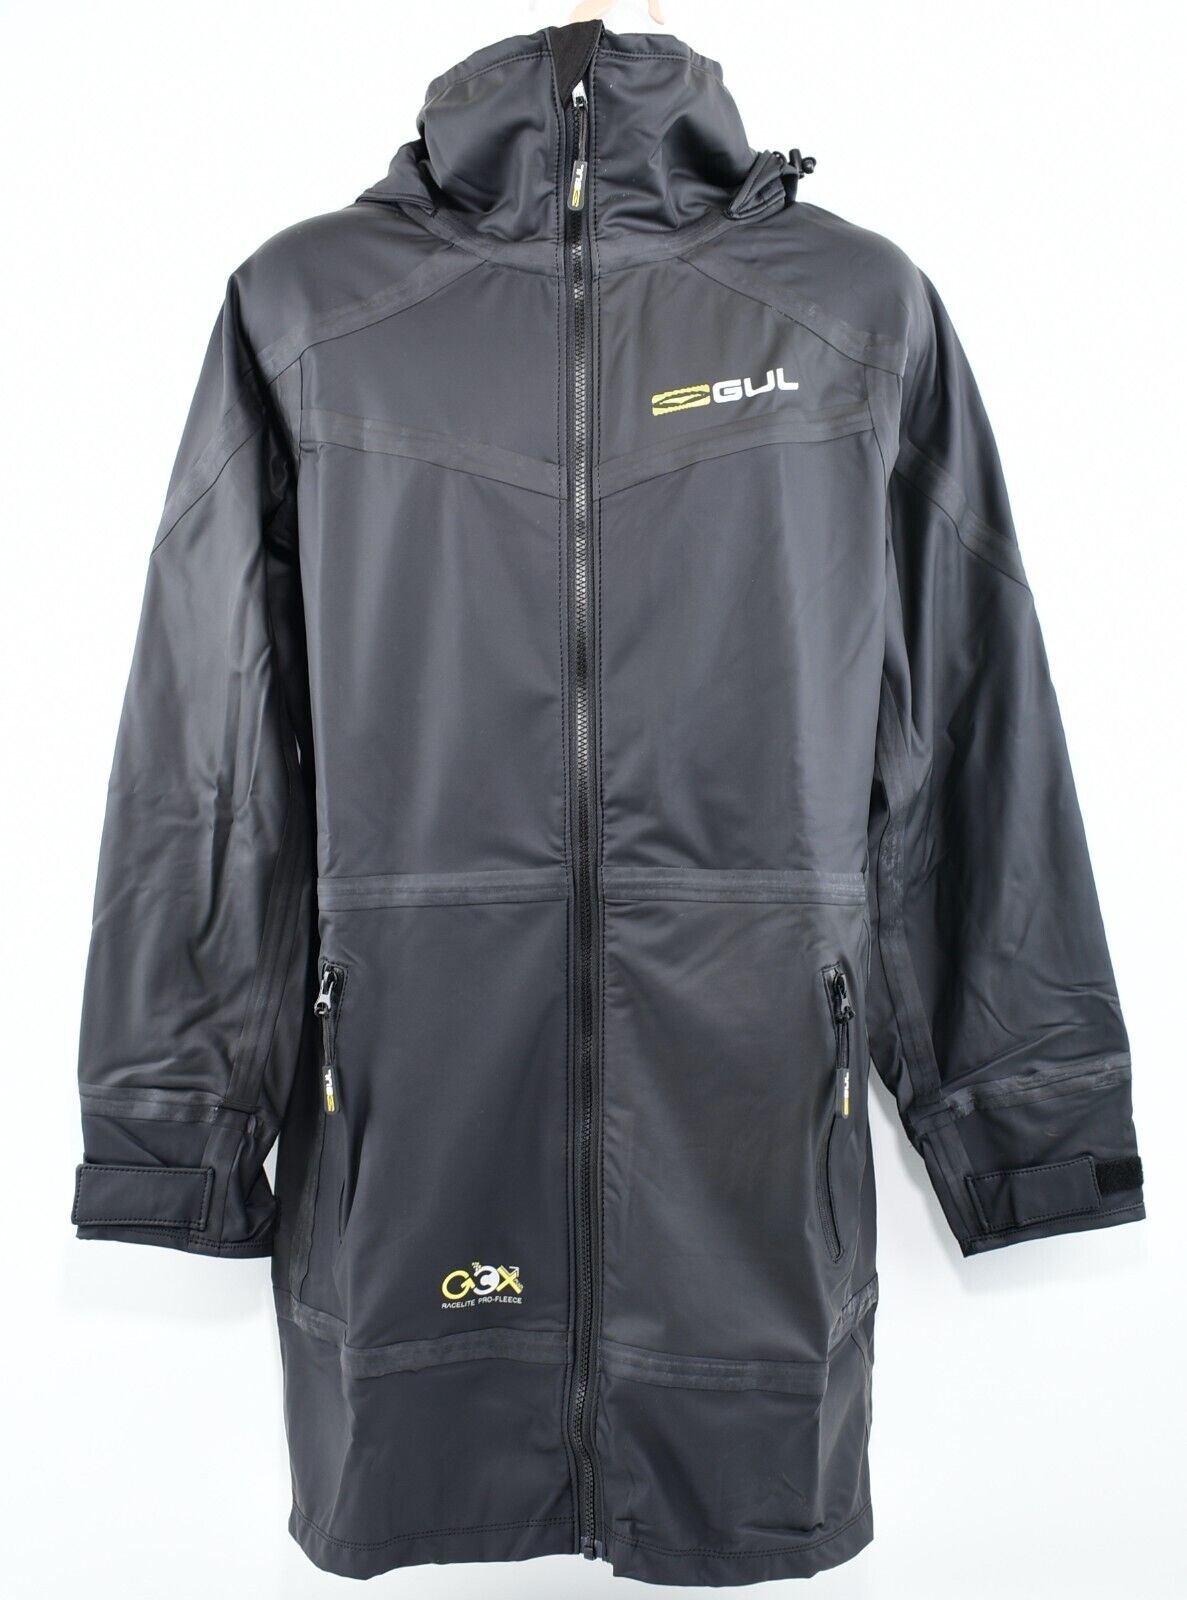 GUL Mens Racelite Pro Rigging Jacket, Black, size XS-S, for chest 32-38 in